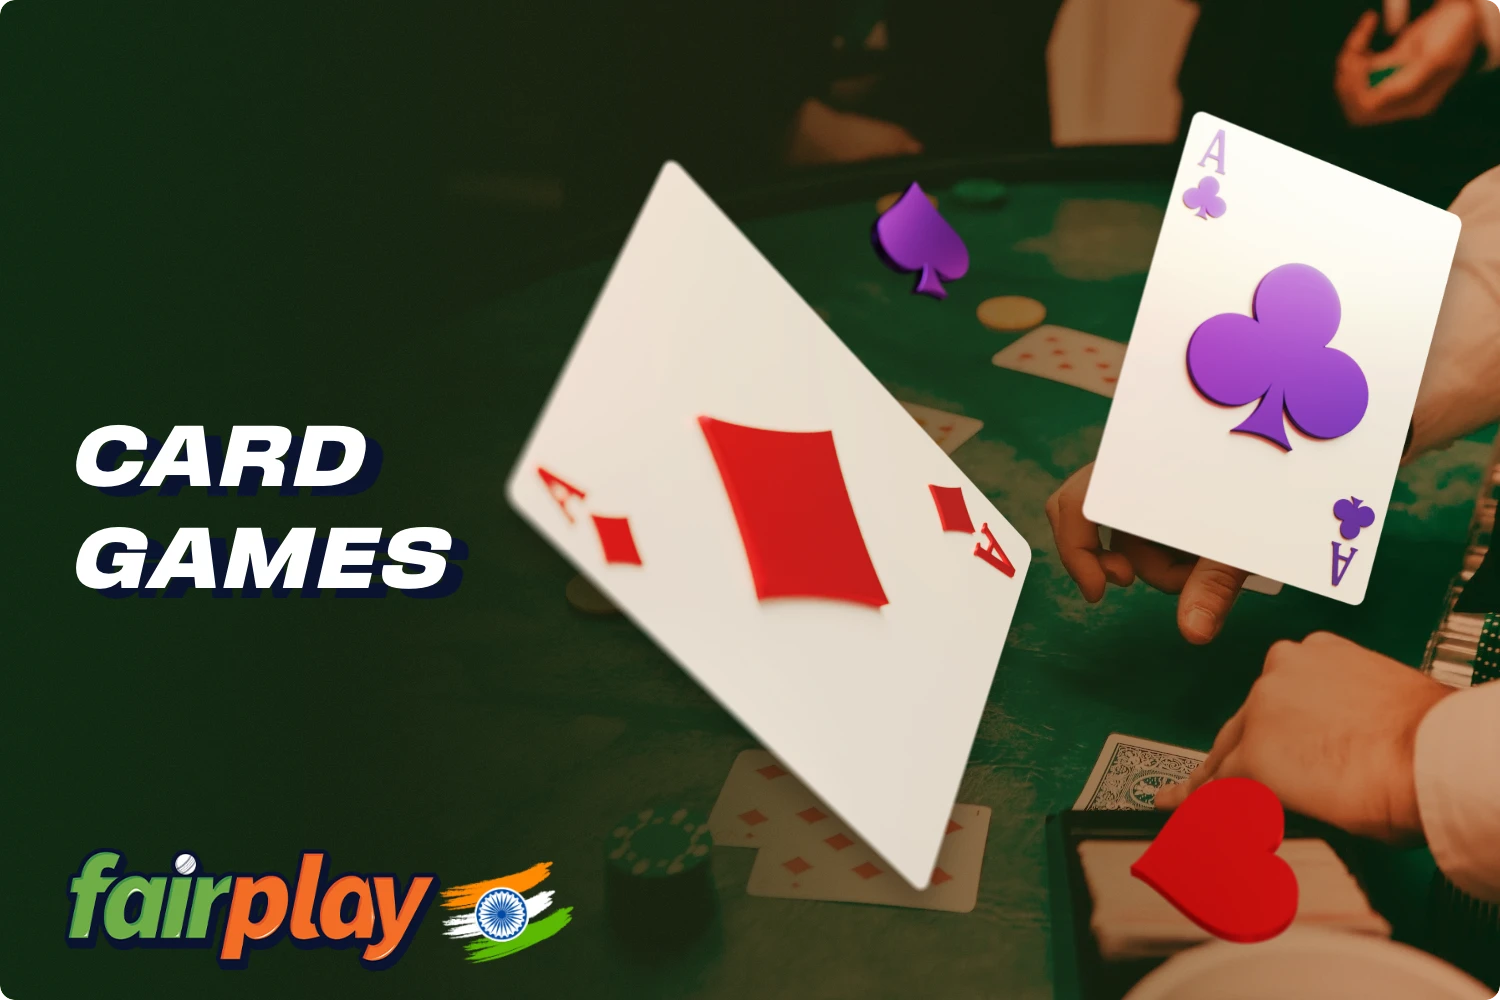 For fans of classic games, card games are available at Fairplay Casino